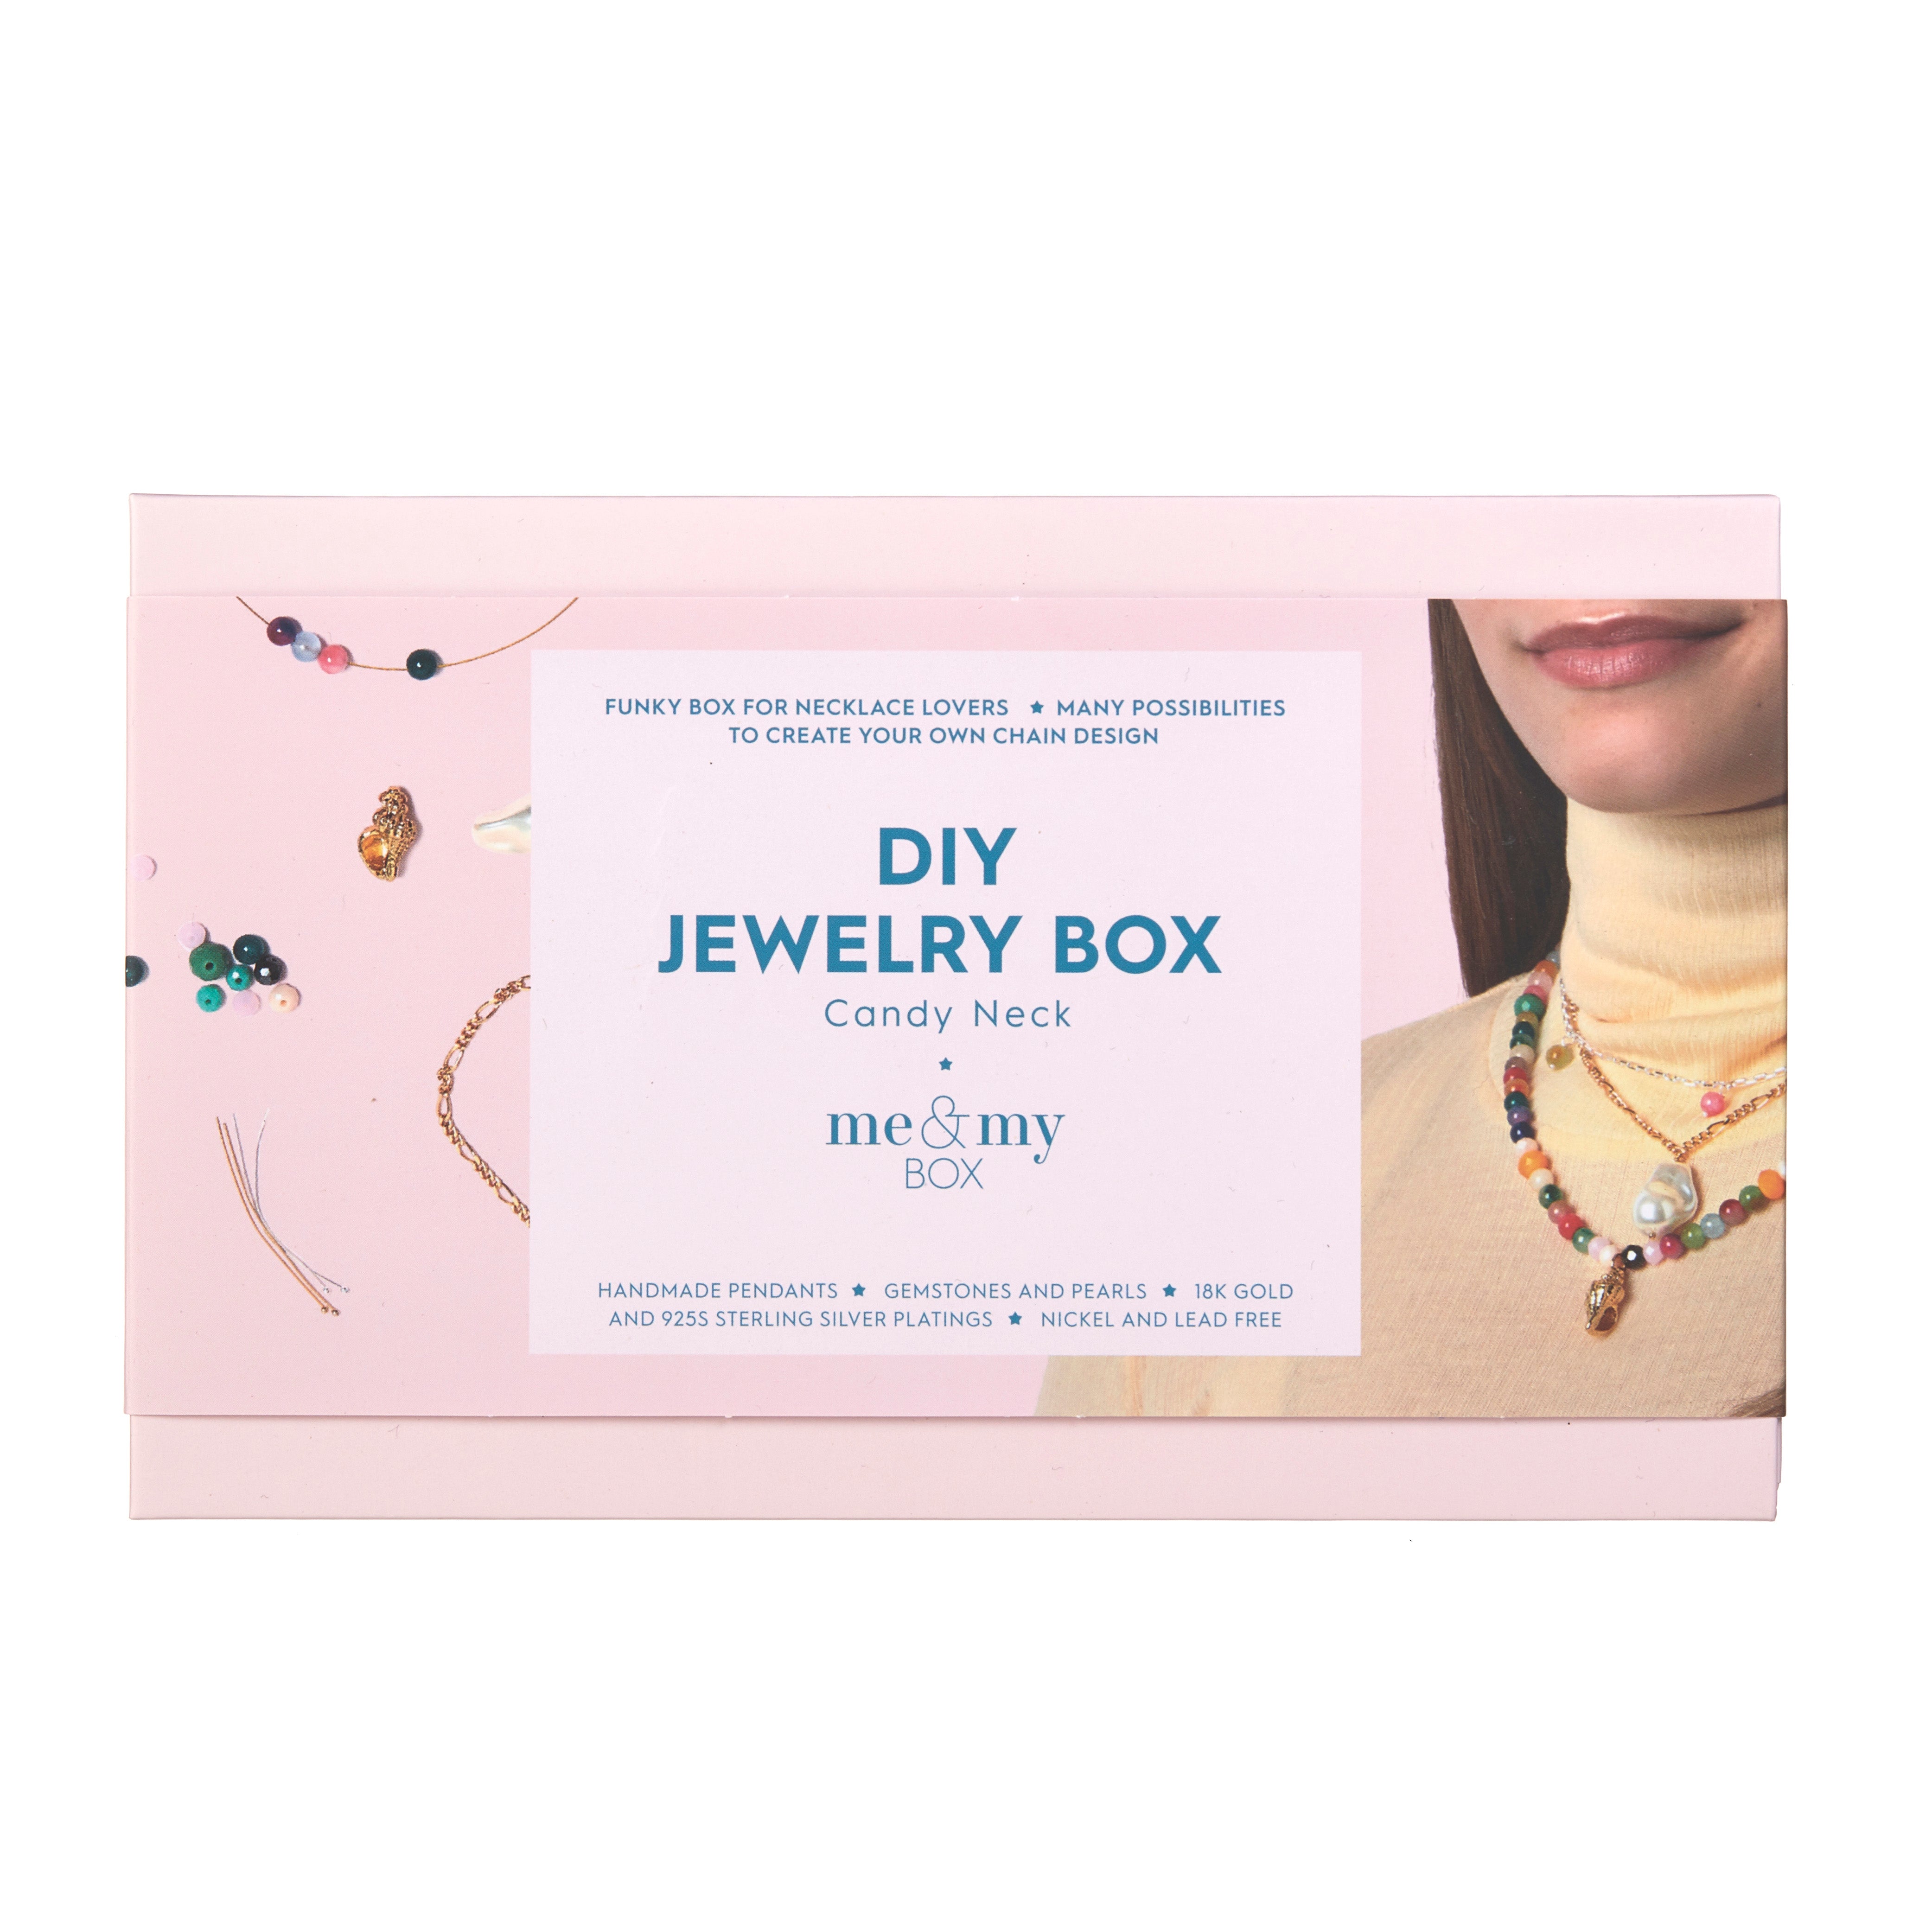 Candy Neck Box No. 9 - Exclusive chain Box for those who love necklaces